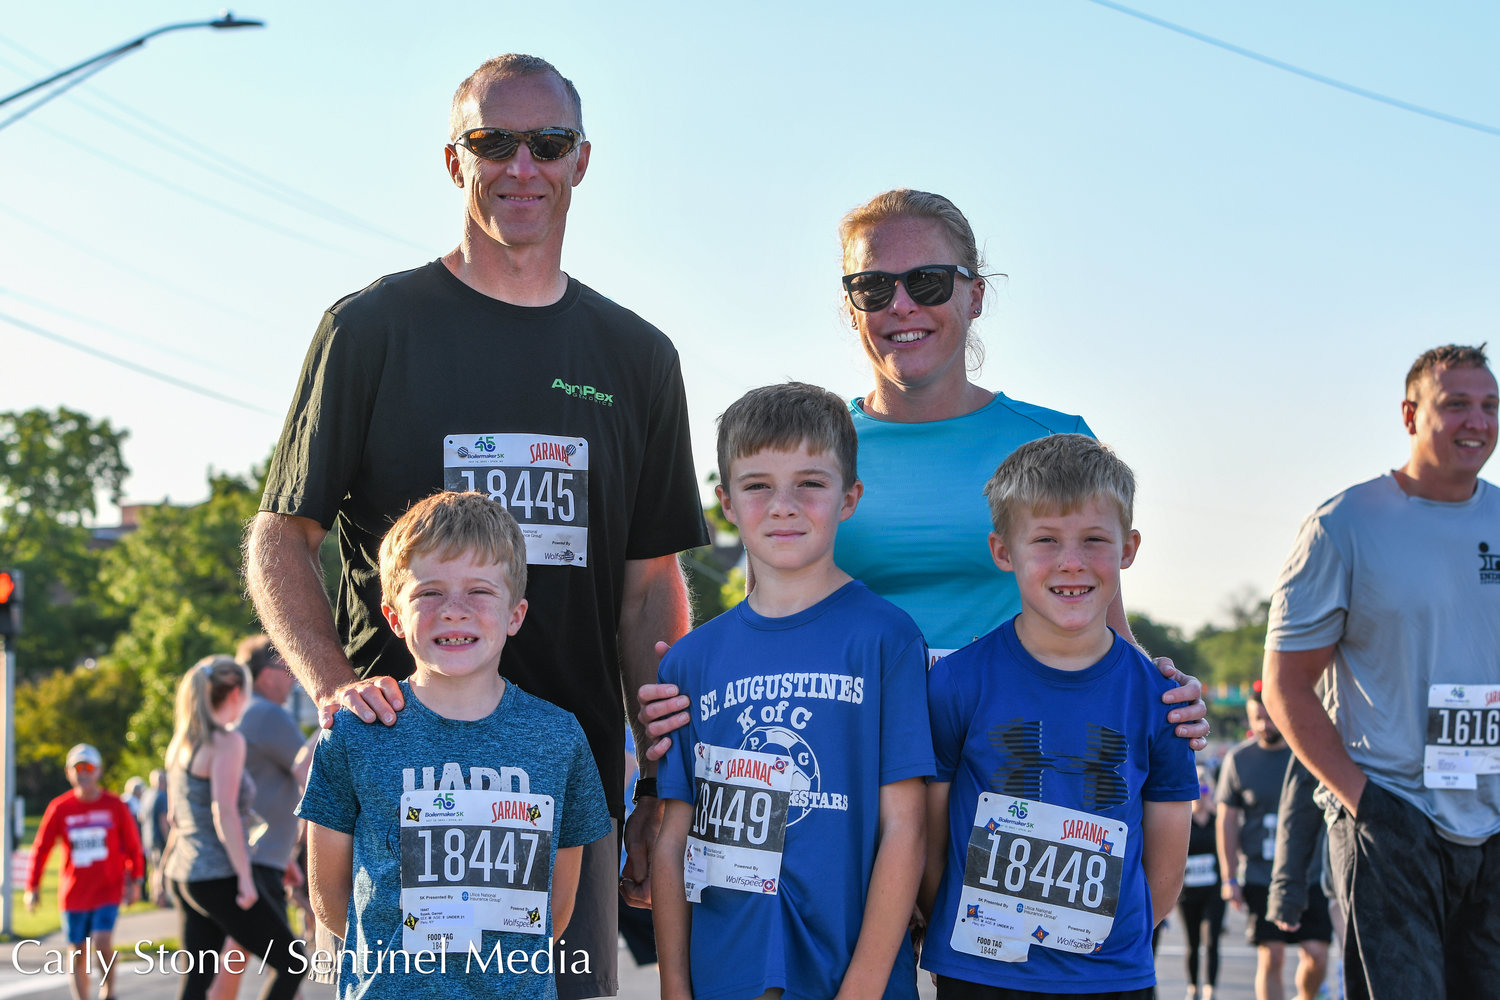 Top left to right: Brian and Emily Sypek. Bottom left to right: Garret, Owen, and Landon Sypek. All competed in the 2022 Boilermaker 5K.